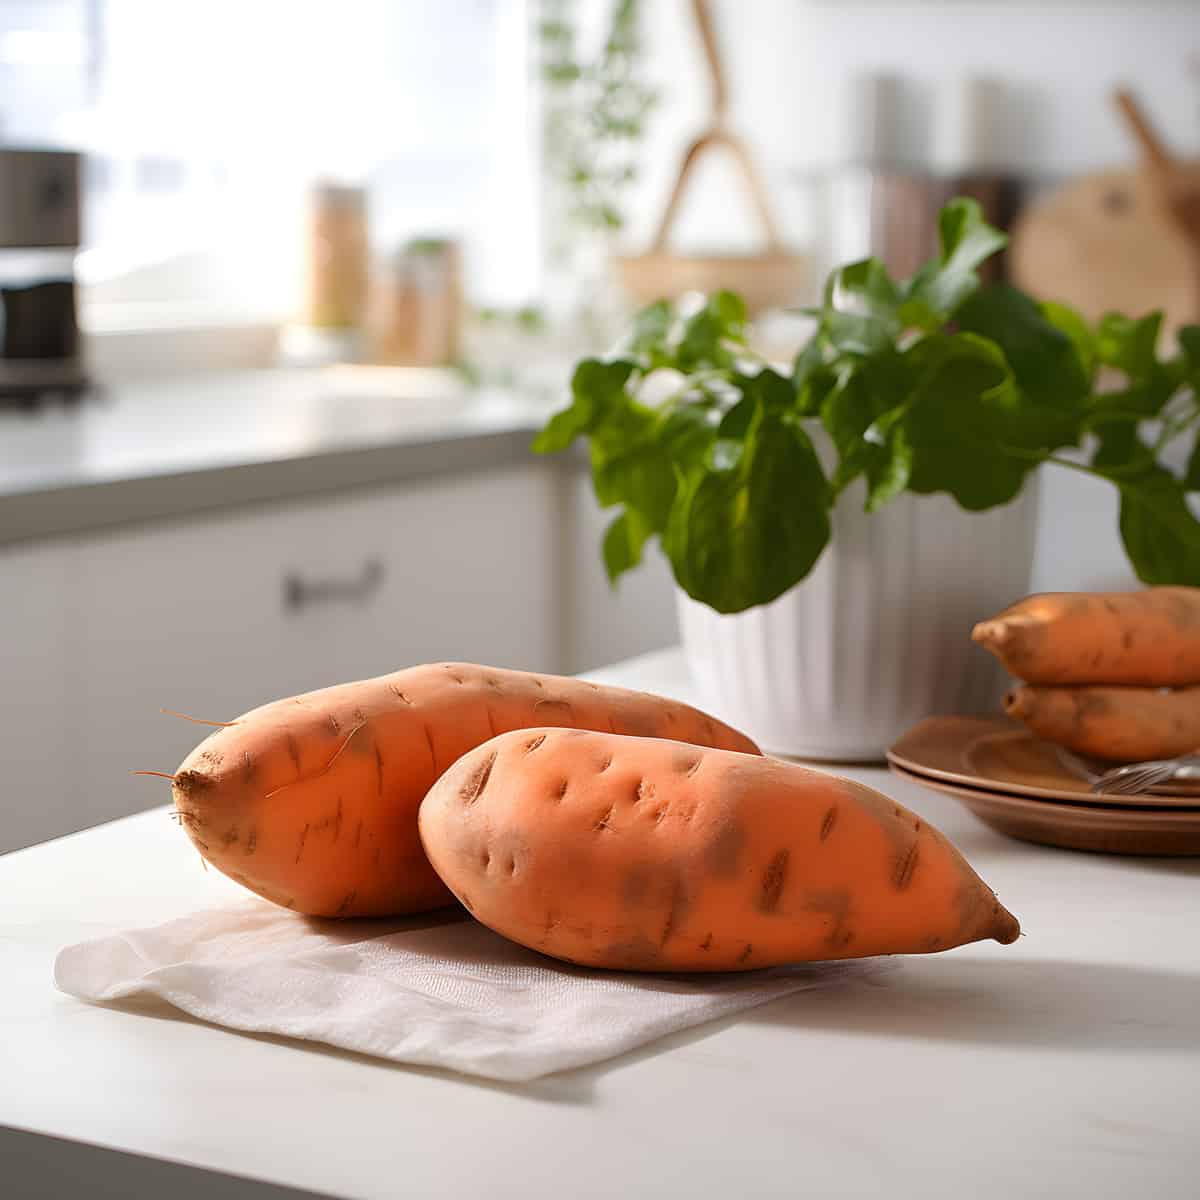 Caromex Sweet Potatoes on a kitchen counter